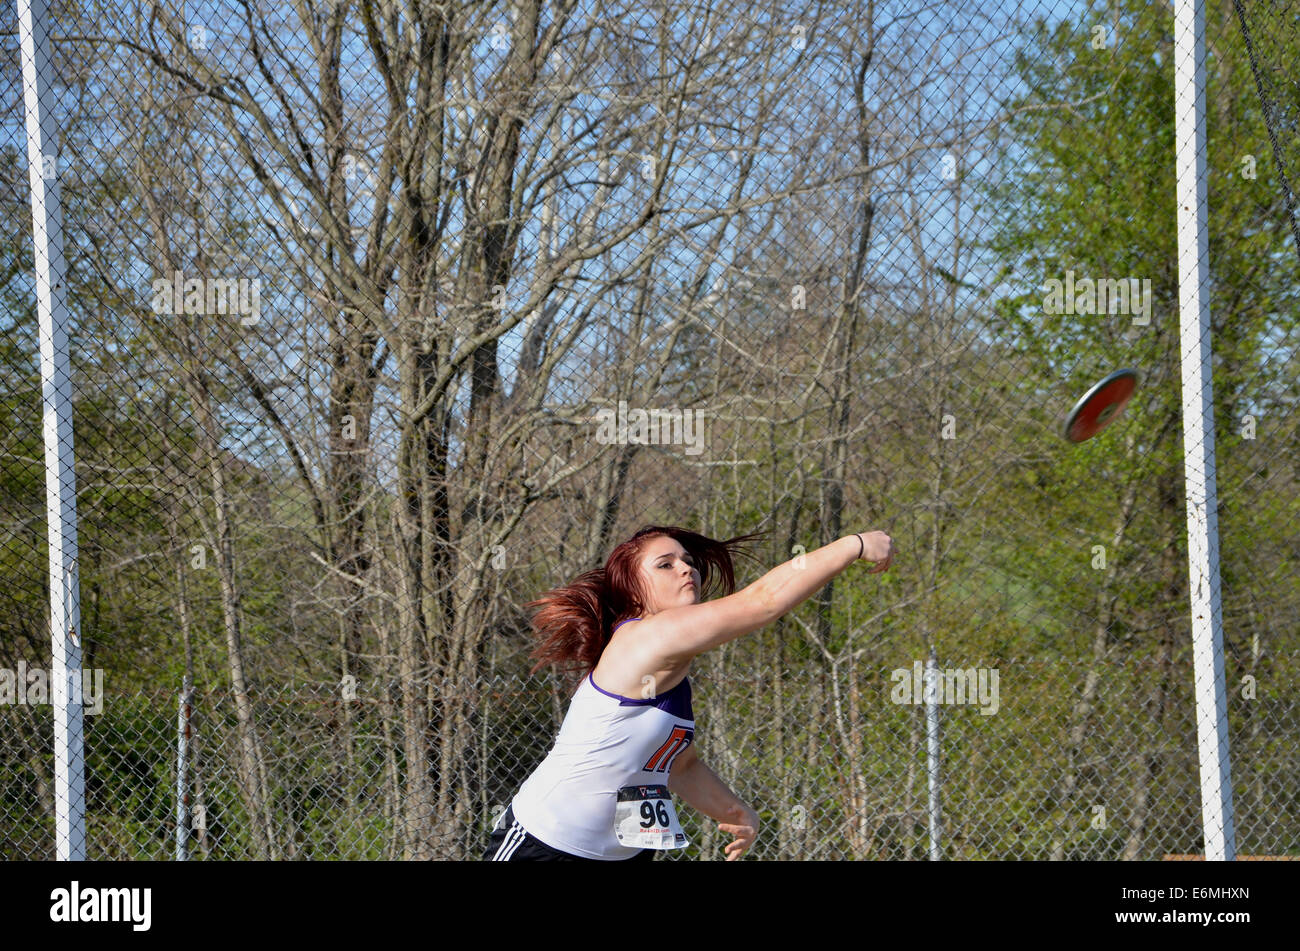 Girl throwing a disk in a high school dicus throwing event at a  track and field event Stock Photo